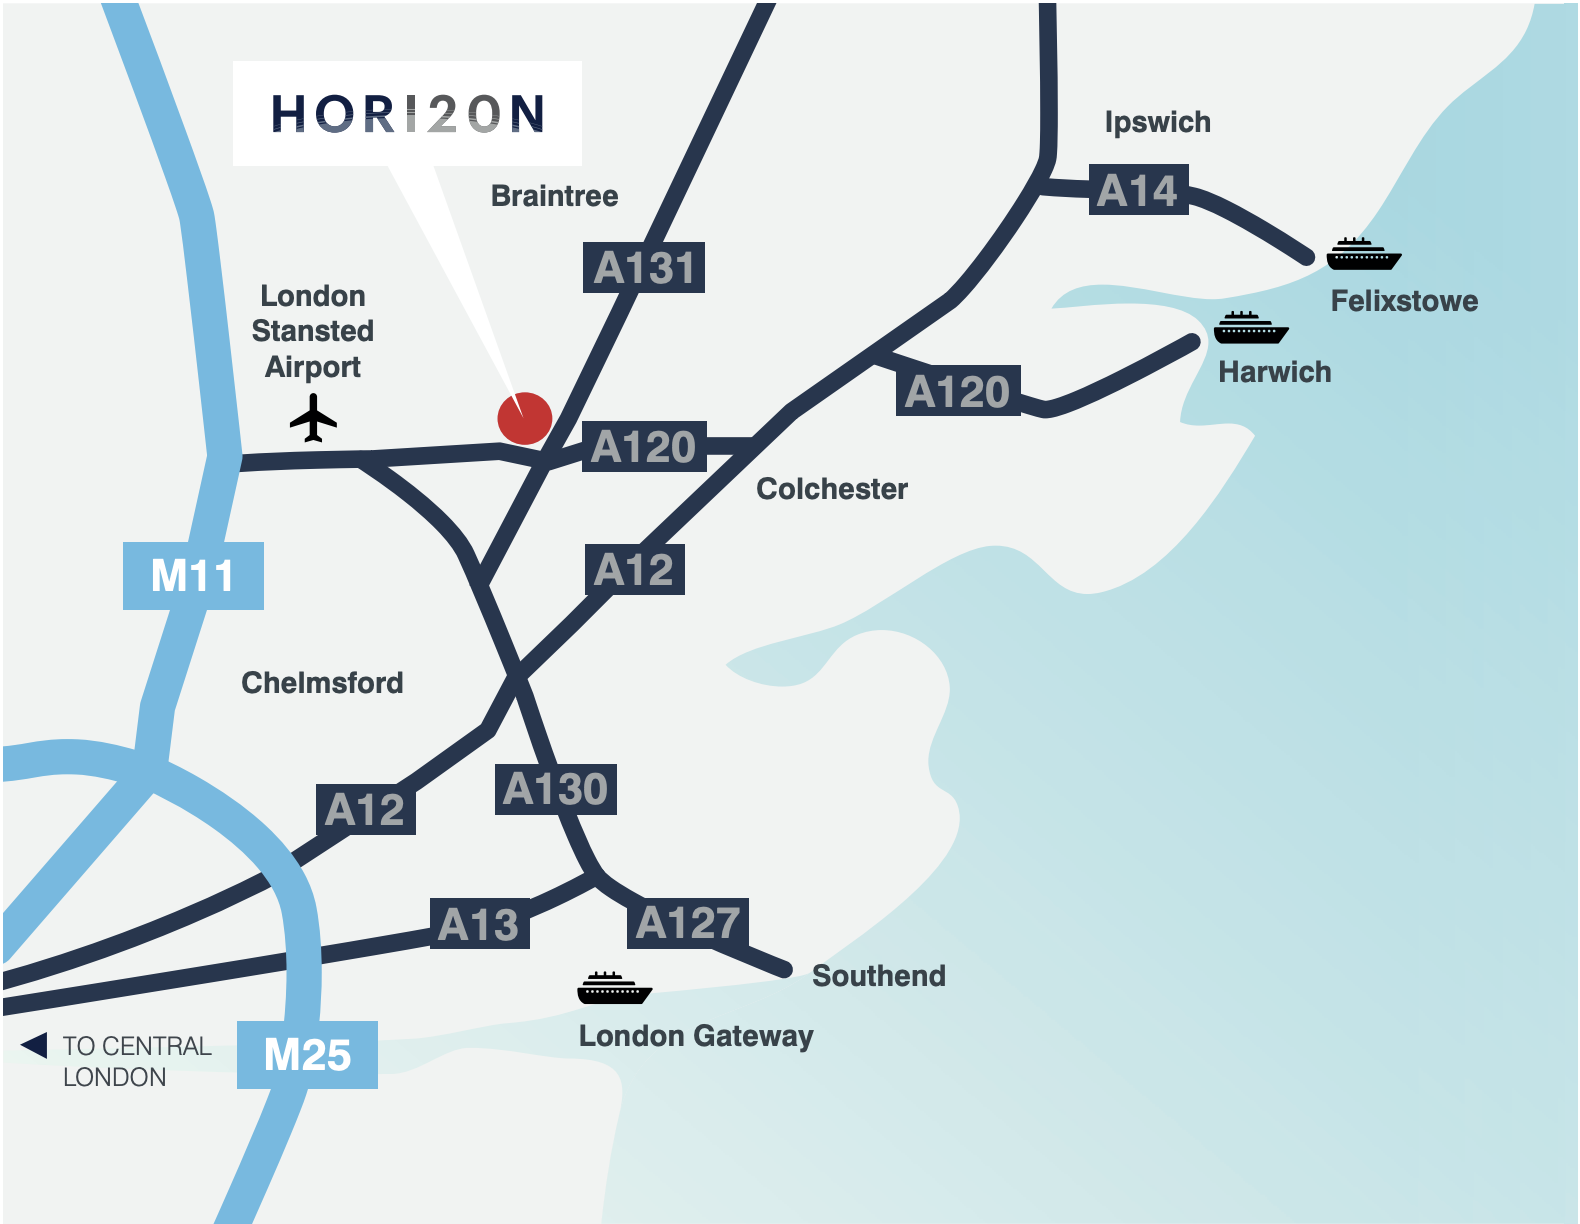 Map of the roads connecting to the H120 site including A12, A120, M11, A131, A14, A130, A13, A127 and M25